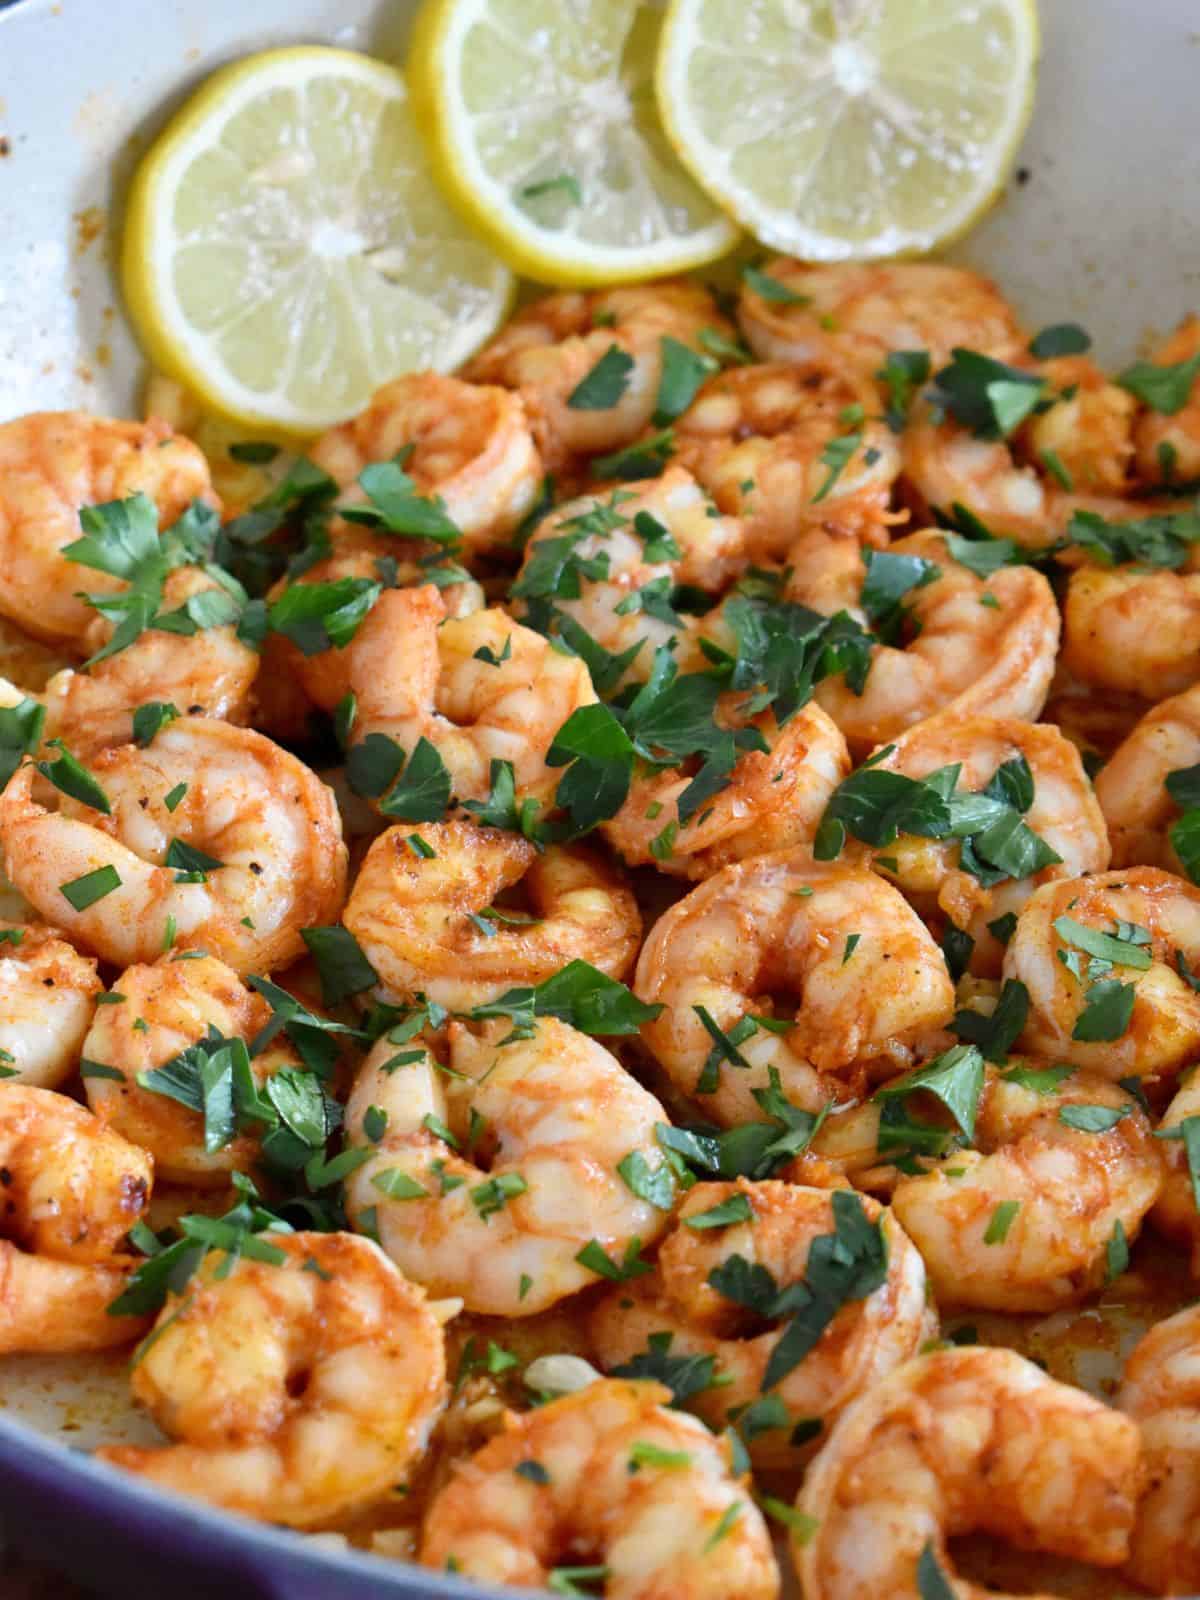 Pan Seared Shrimp with garlic in a pan with lemon slices and parsley on top.